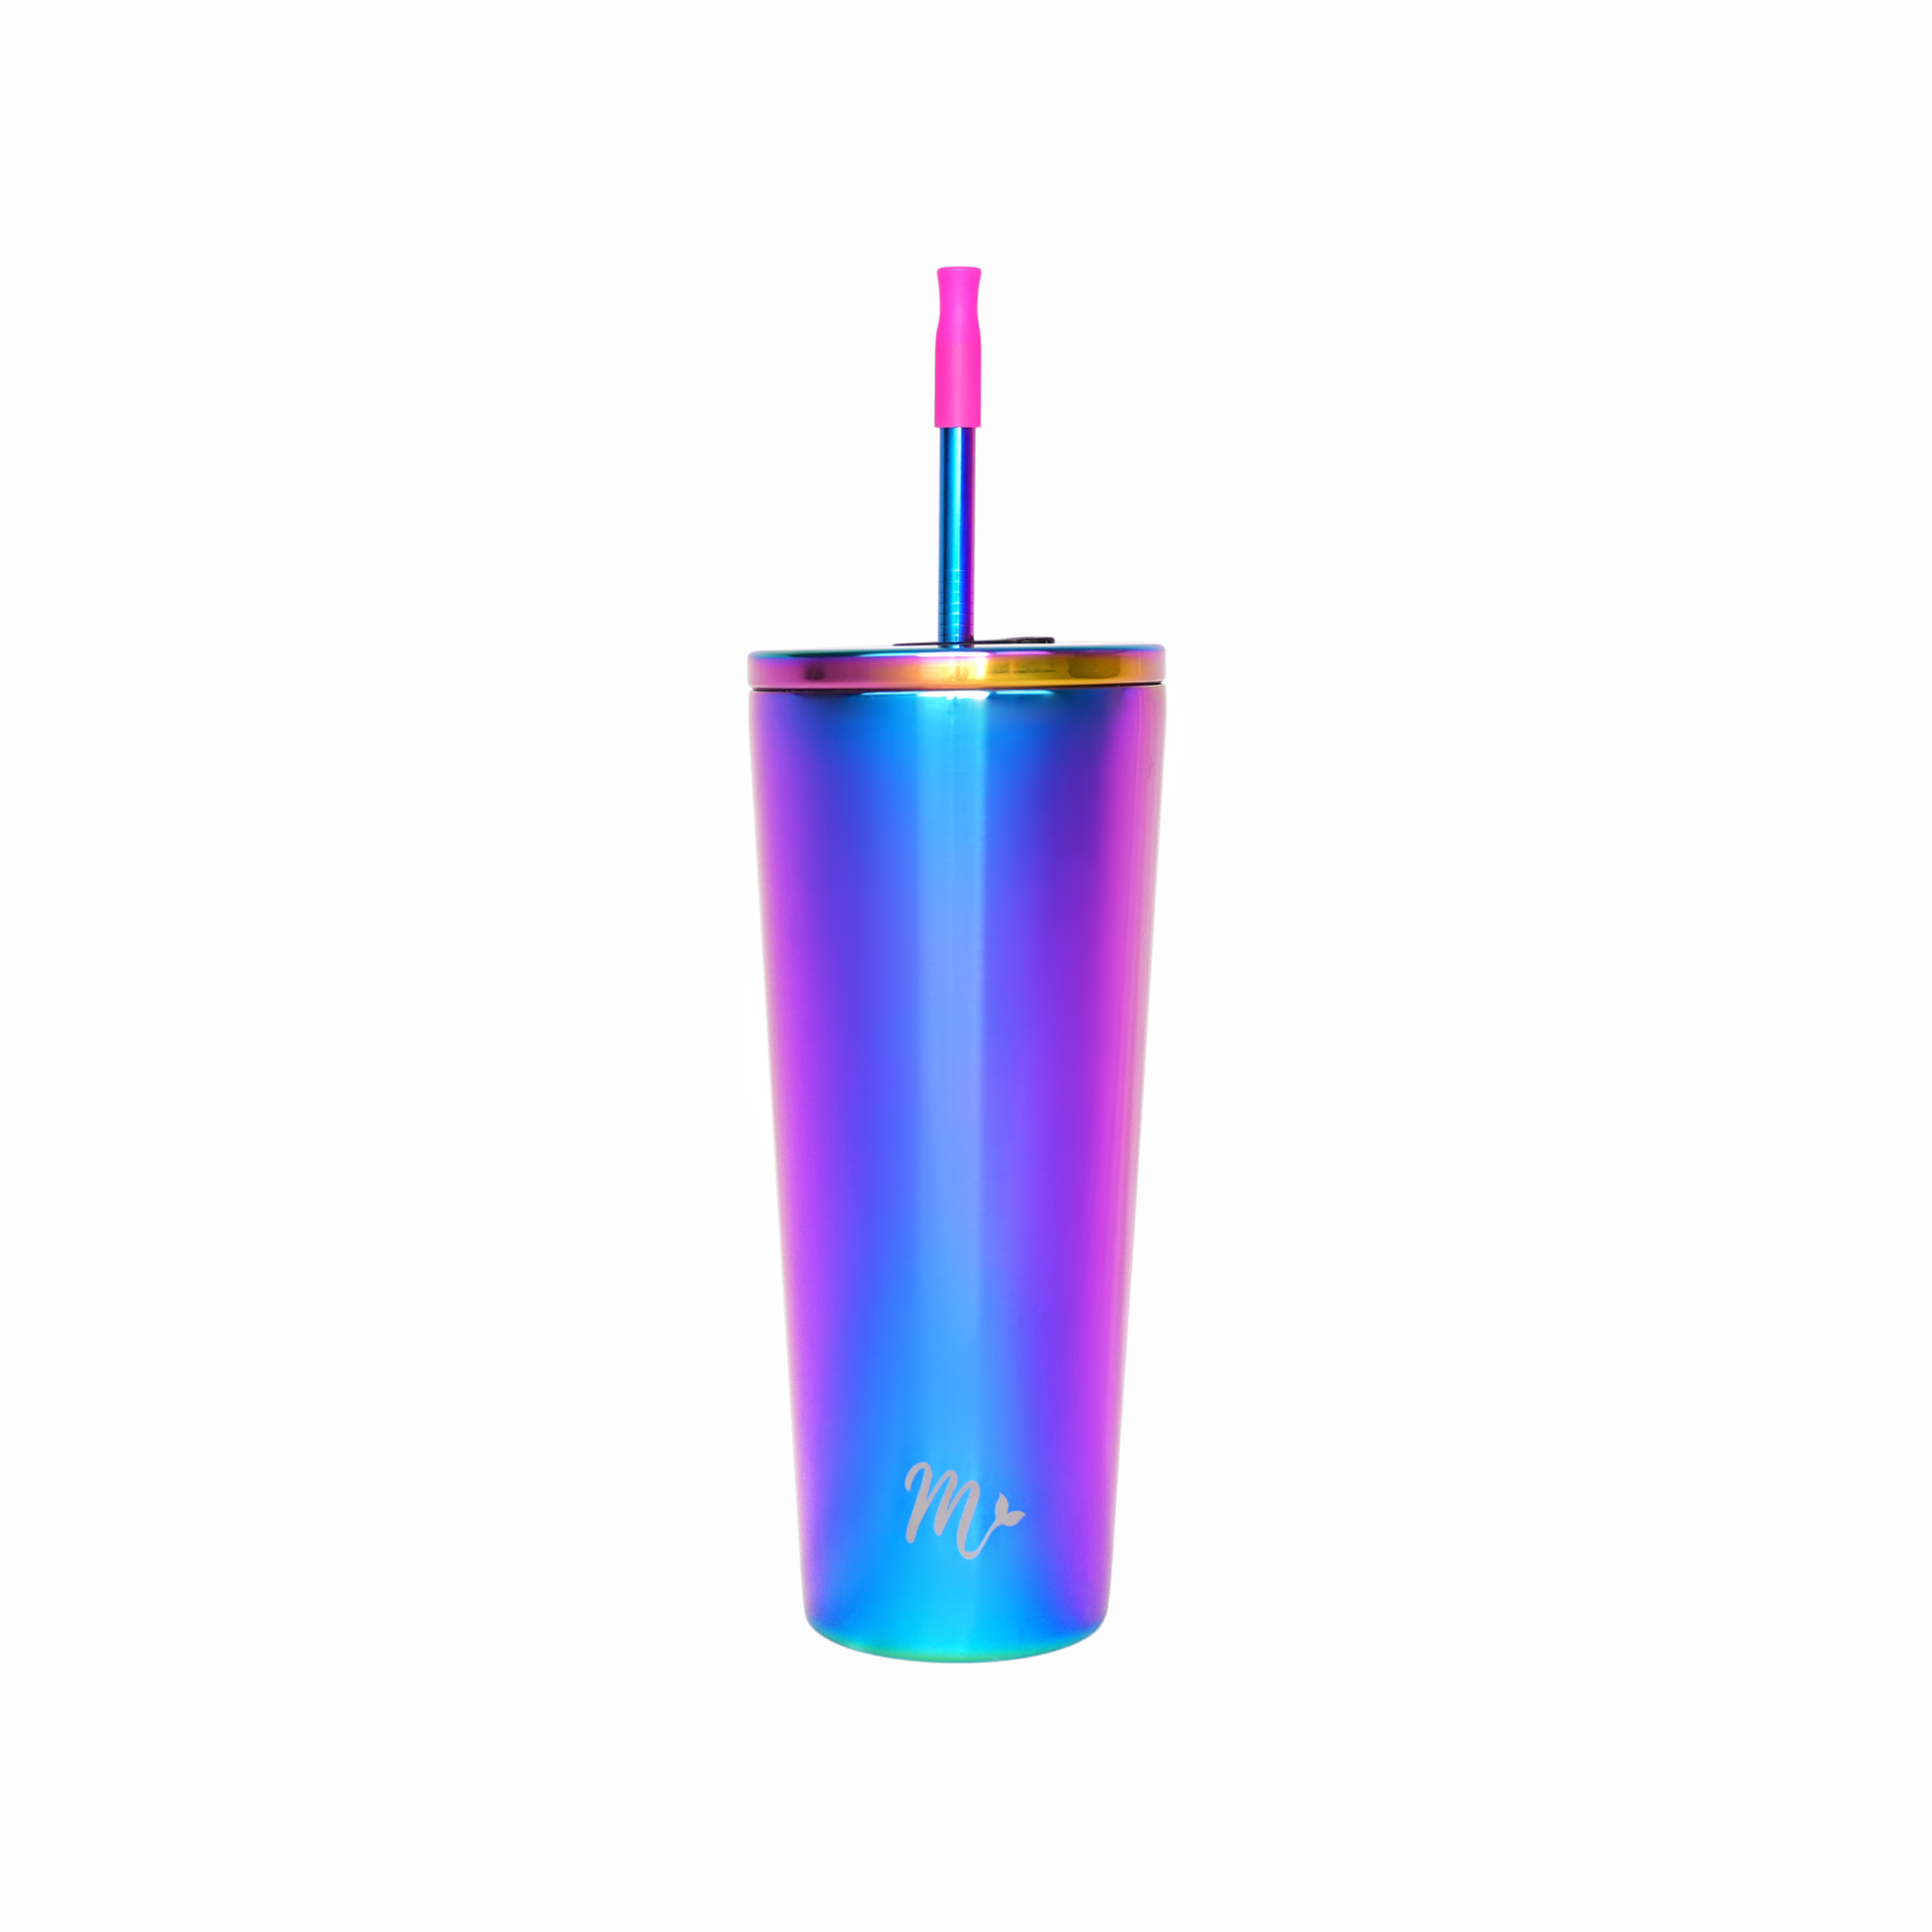 Mermaid Straw - WE BACK. The long awaited Mermaid Cup in RESTOCKED!! Guys,  this cup is magical. It keeps your drinks cold literally the entire day.  And it's stunning. Pics never do